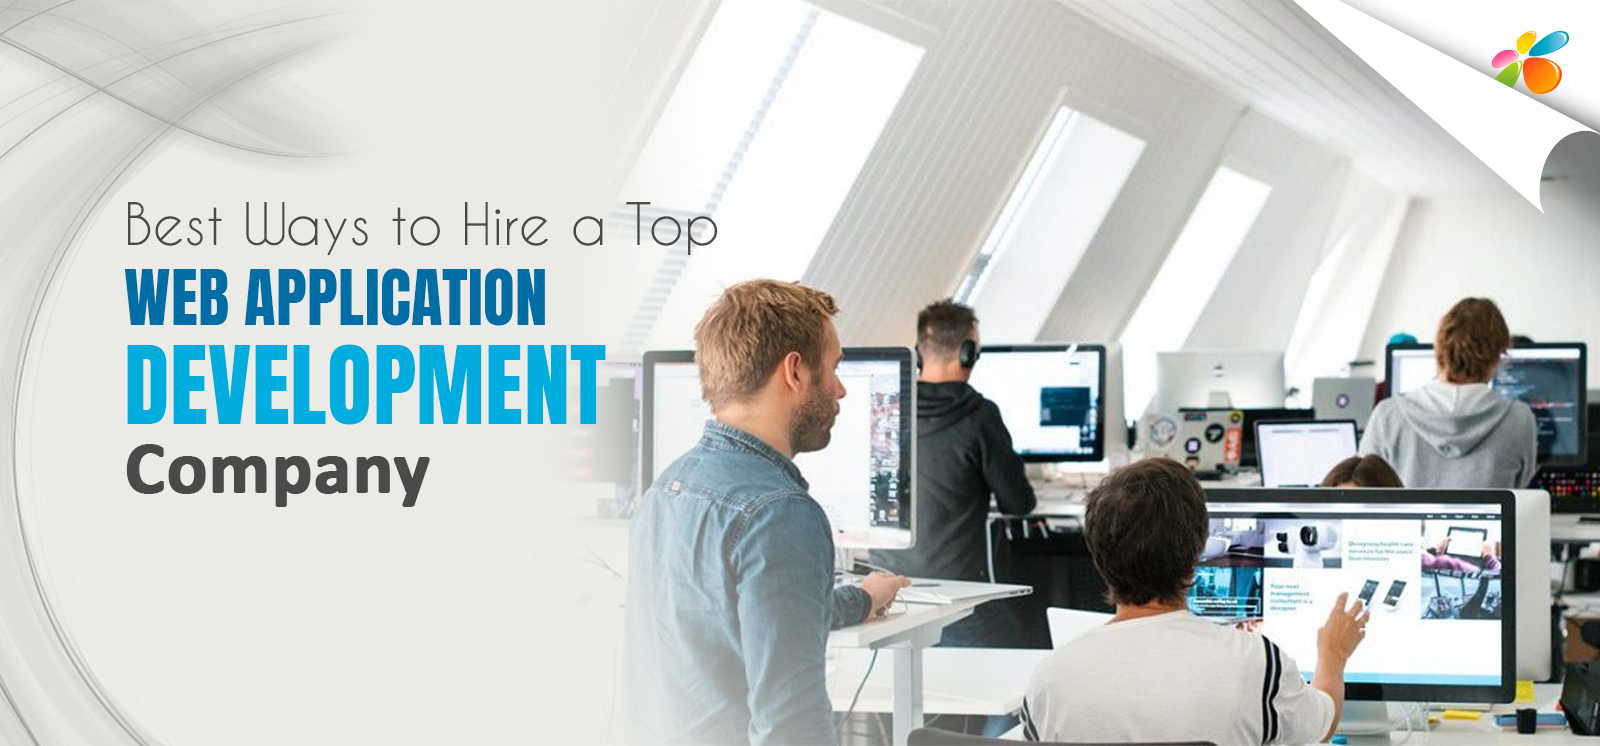 Best Ways to Hire a Top Web Application Development Company